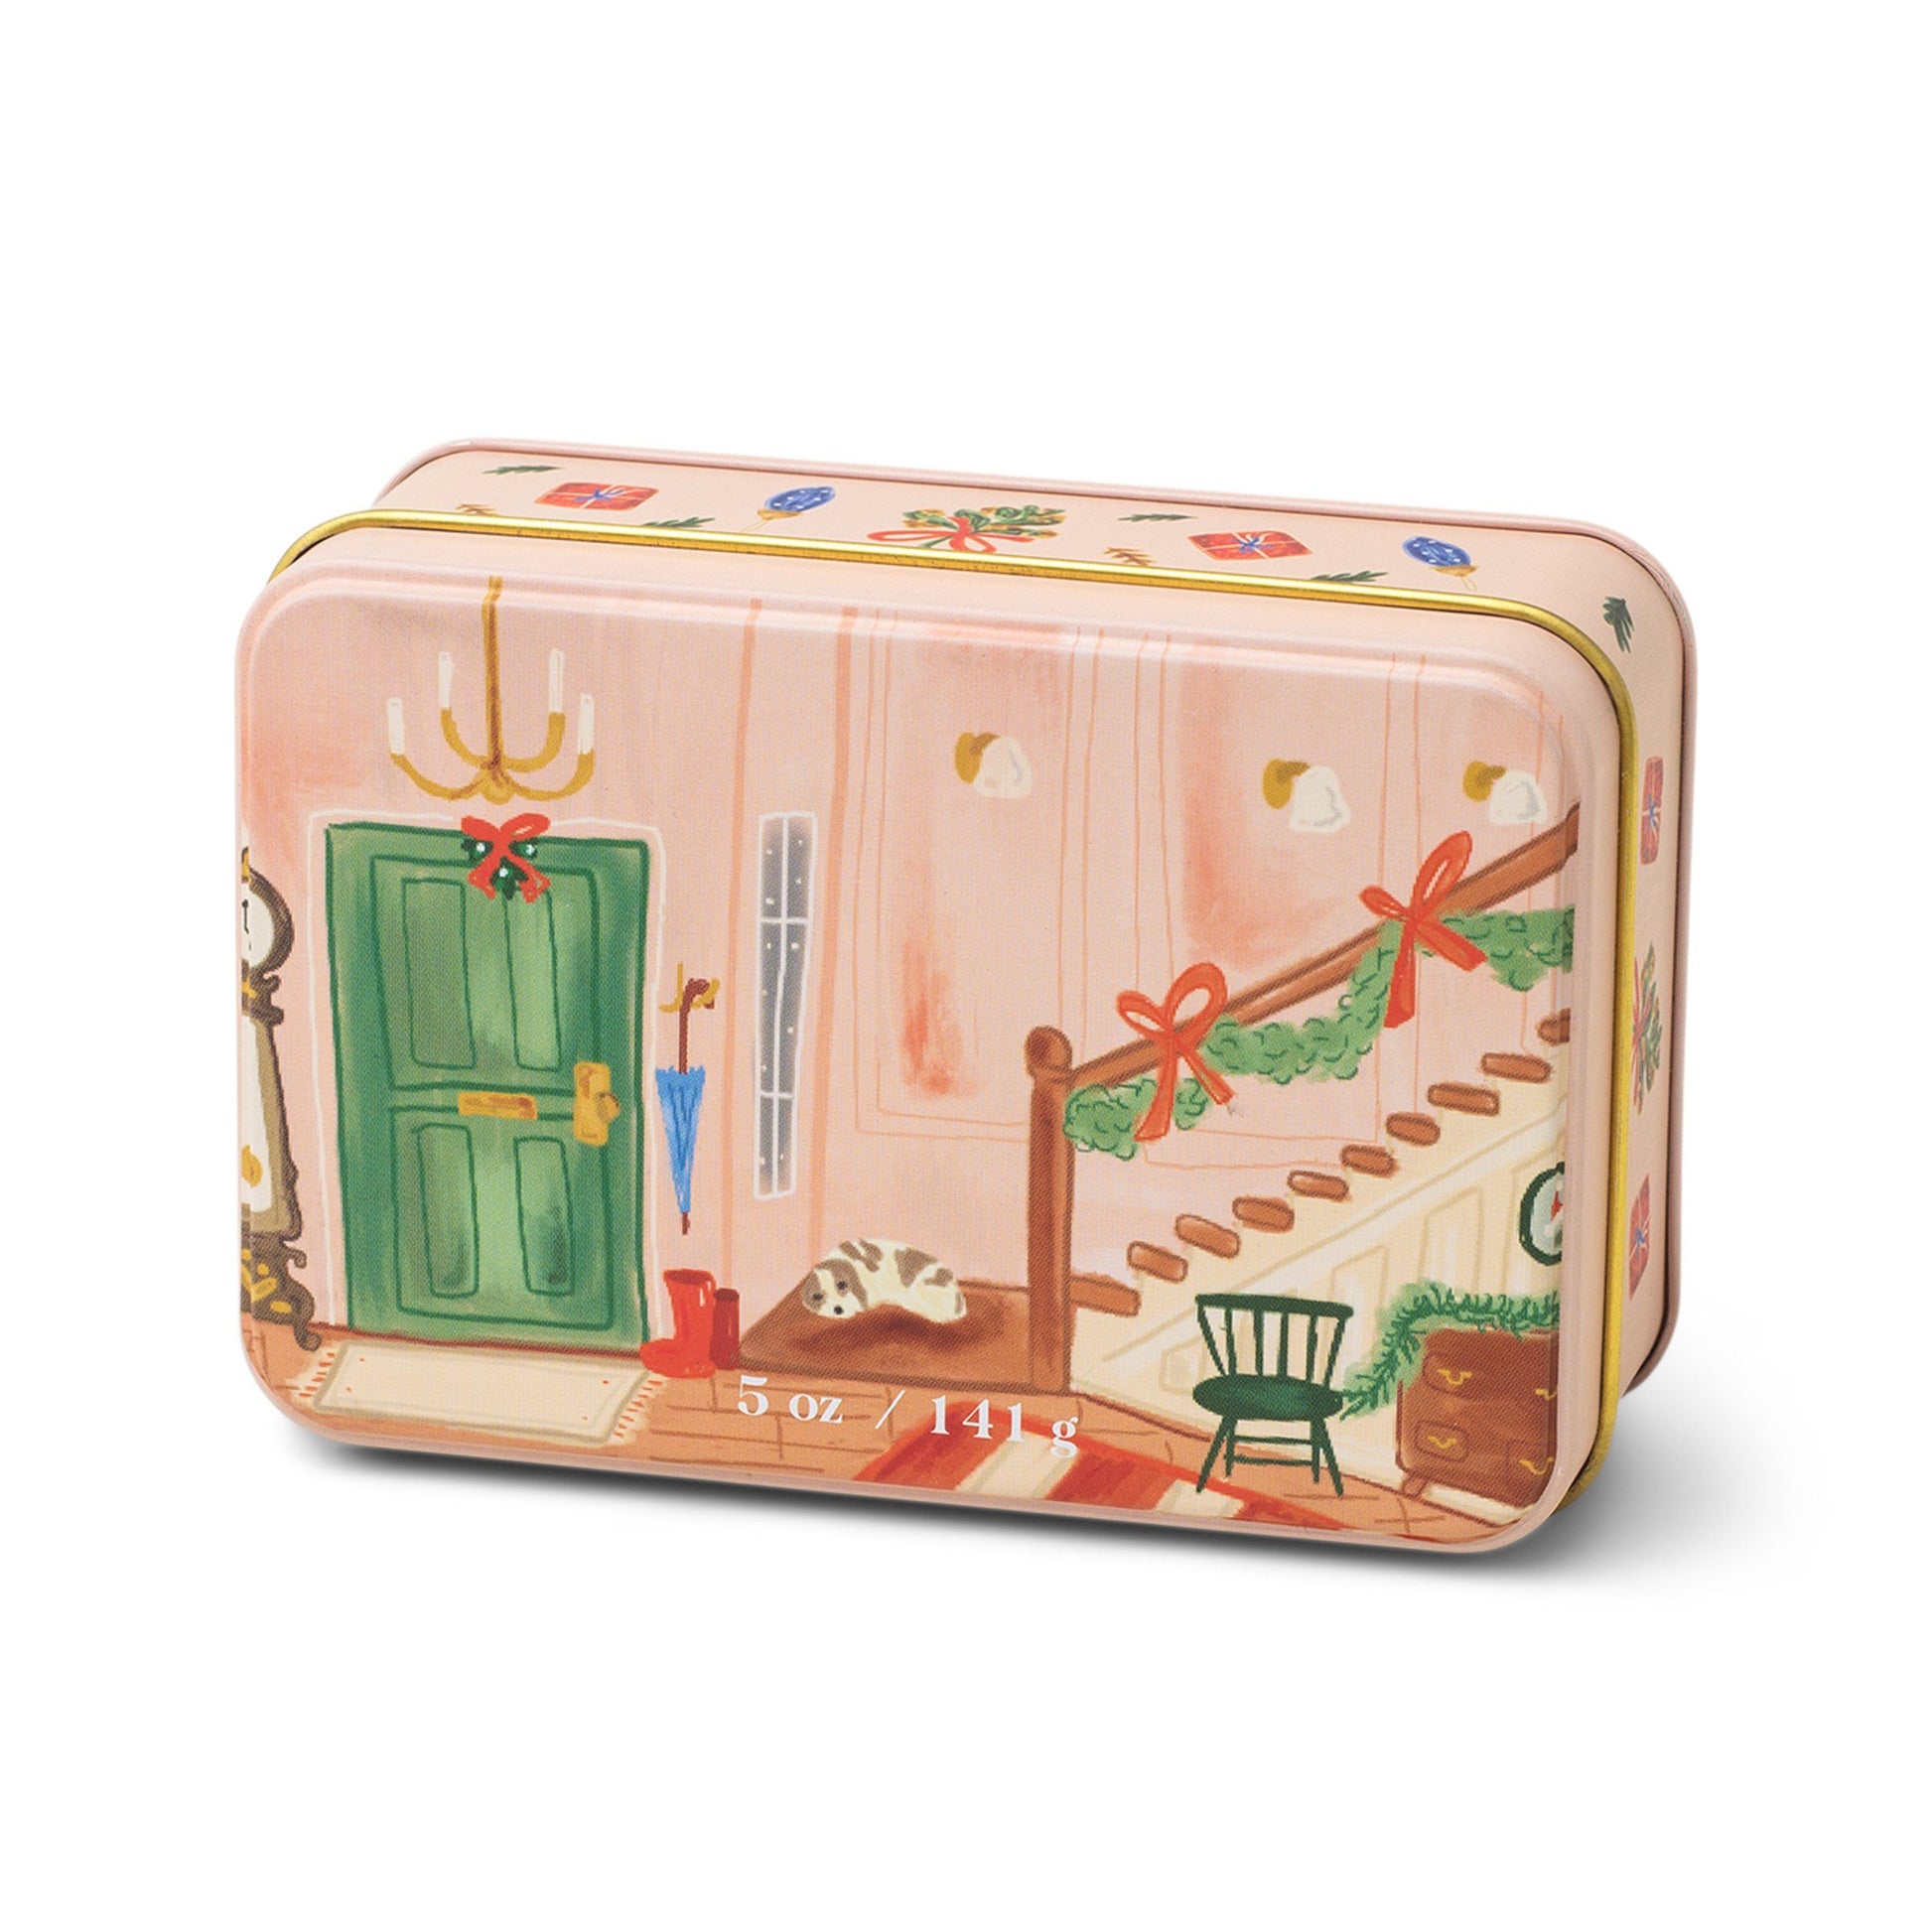 5 oz holiday tin with custom artwork; lid shows house entry decorated for the holidays